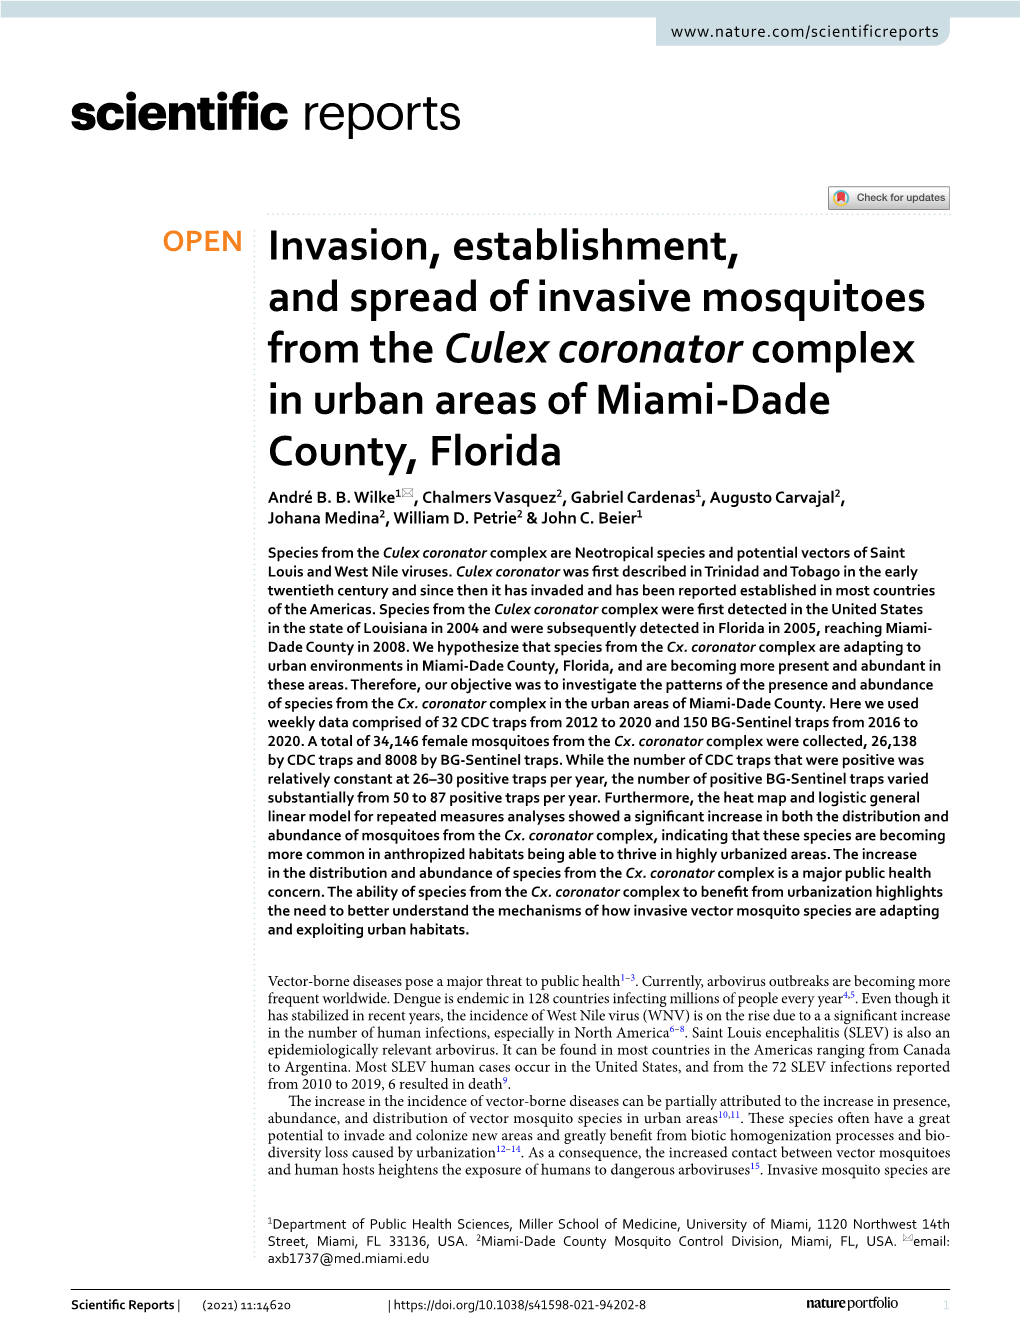 Invasion, Establishment, and Spread of Invasive Mosquitoes from the Culex Coronator Complex in Urban Areas of Miami‑Dade County, Florida André B